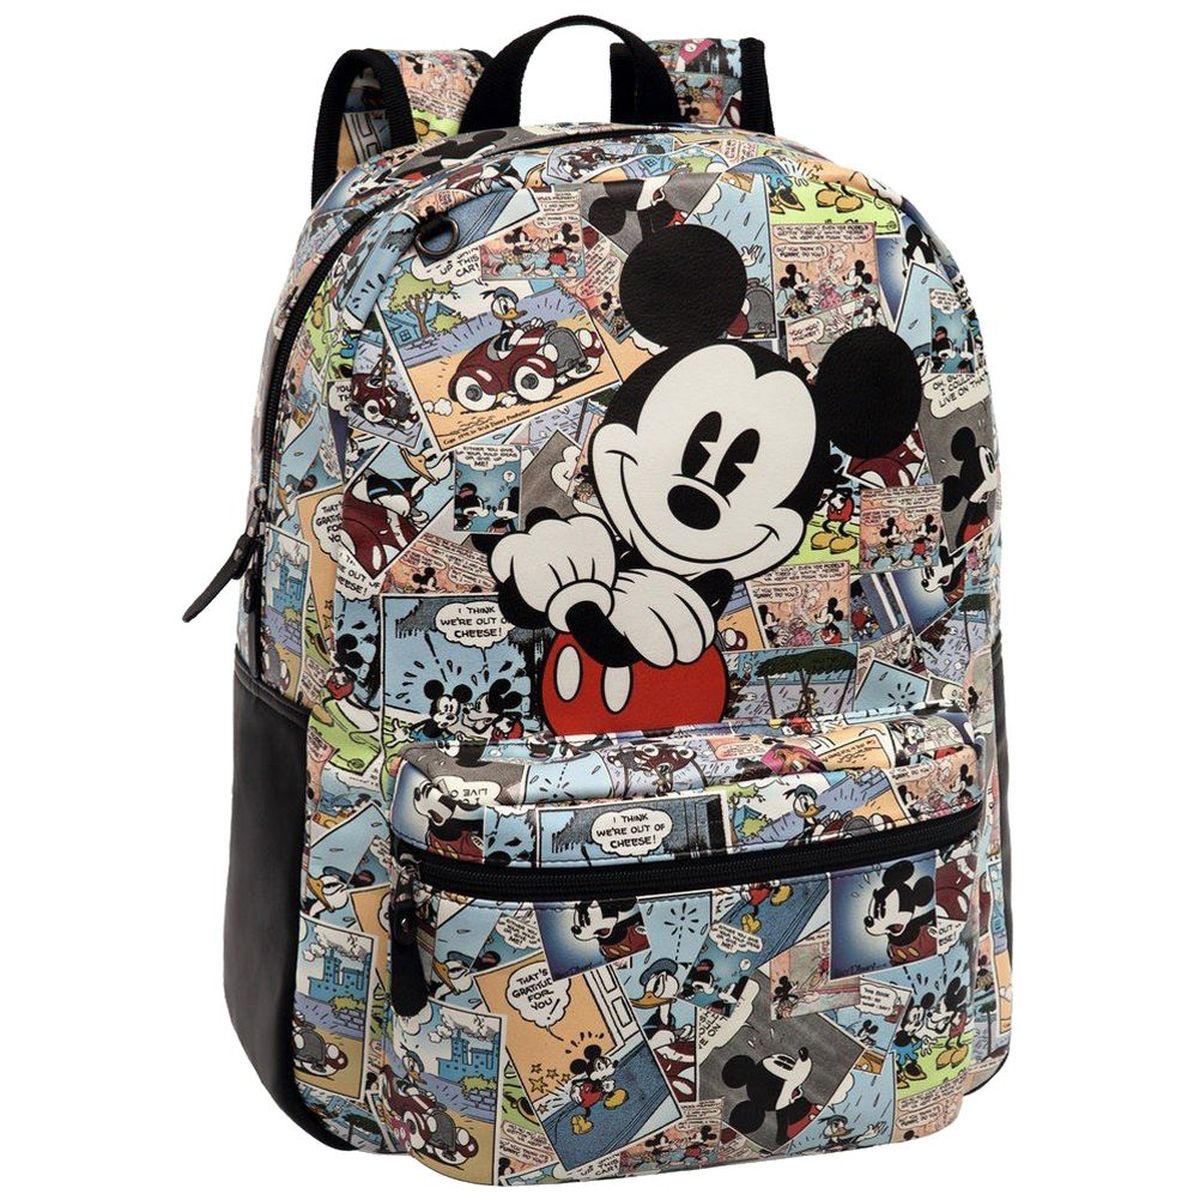 Disney Bags Disney Padded Mickey Mouse Comic Strip Backpack Poshmark Hot Sex Picture 